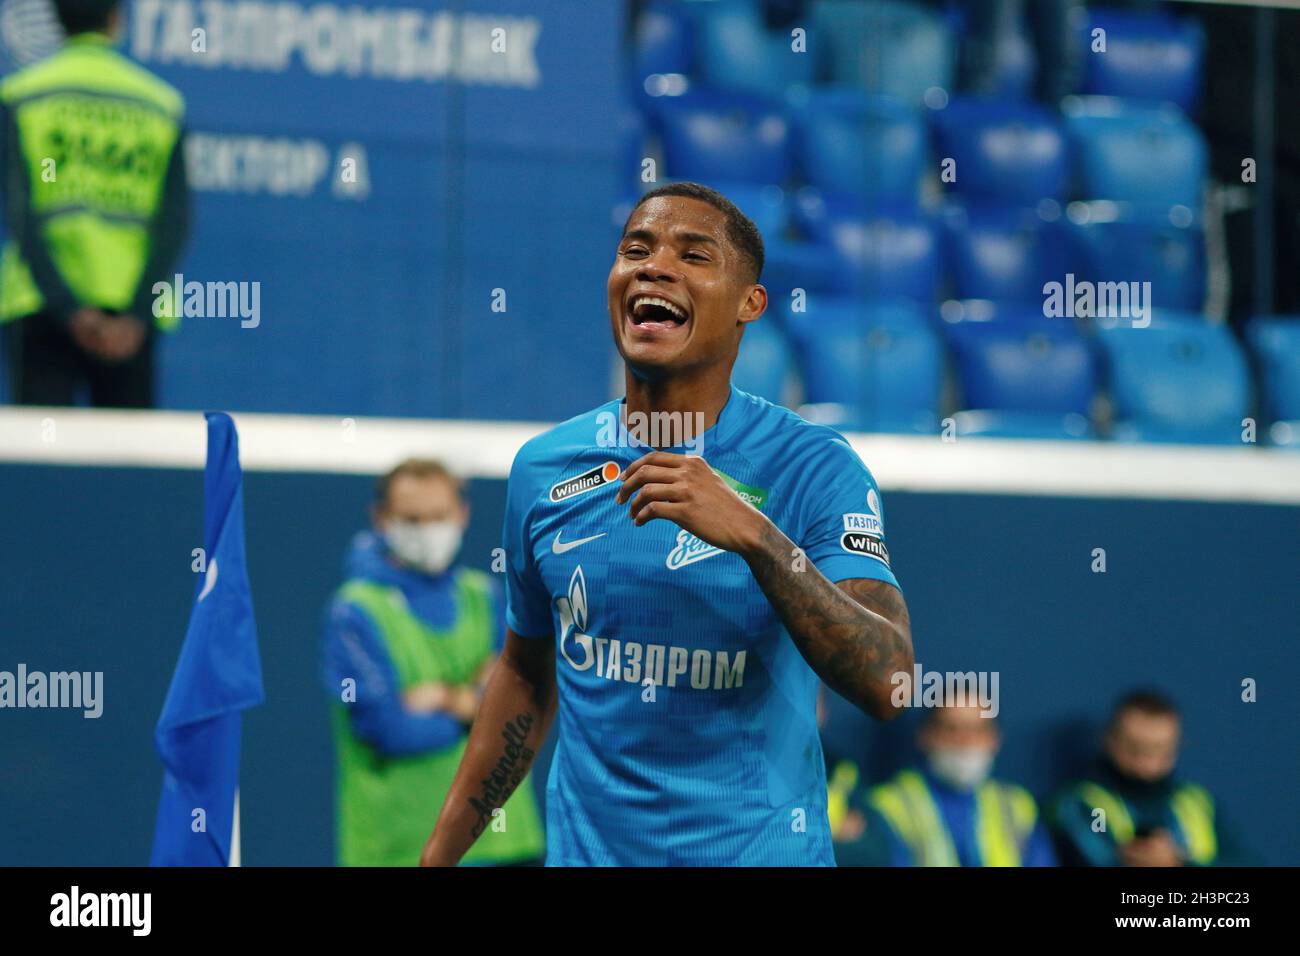 Saint Petersburg, Russia. 29th Oct, 2021. Wilmar Henrique Barrios Teran, commonly known as Wilmar Barrios (No.5) of Zenit seen during the Russian Premier League football match between Zenit Saint Petersburg and Dynamo Moscow at Gazprom Arena.Final score; Zenit 4:1 Dynamo. (Photo by Maksim Konstantinov/SOPA Image/Sipa USA) Credit: Sipa USA/Alamy Live News Stock Photo